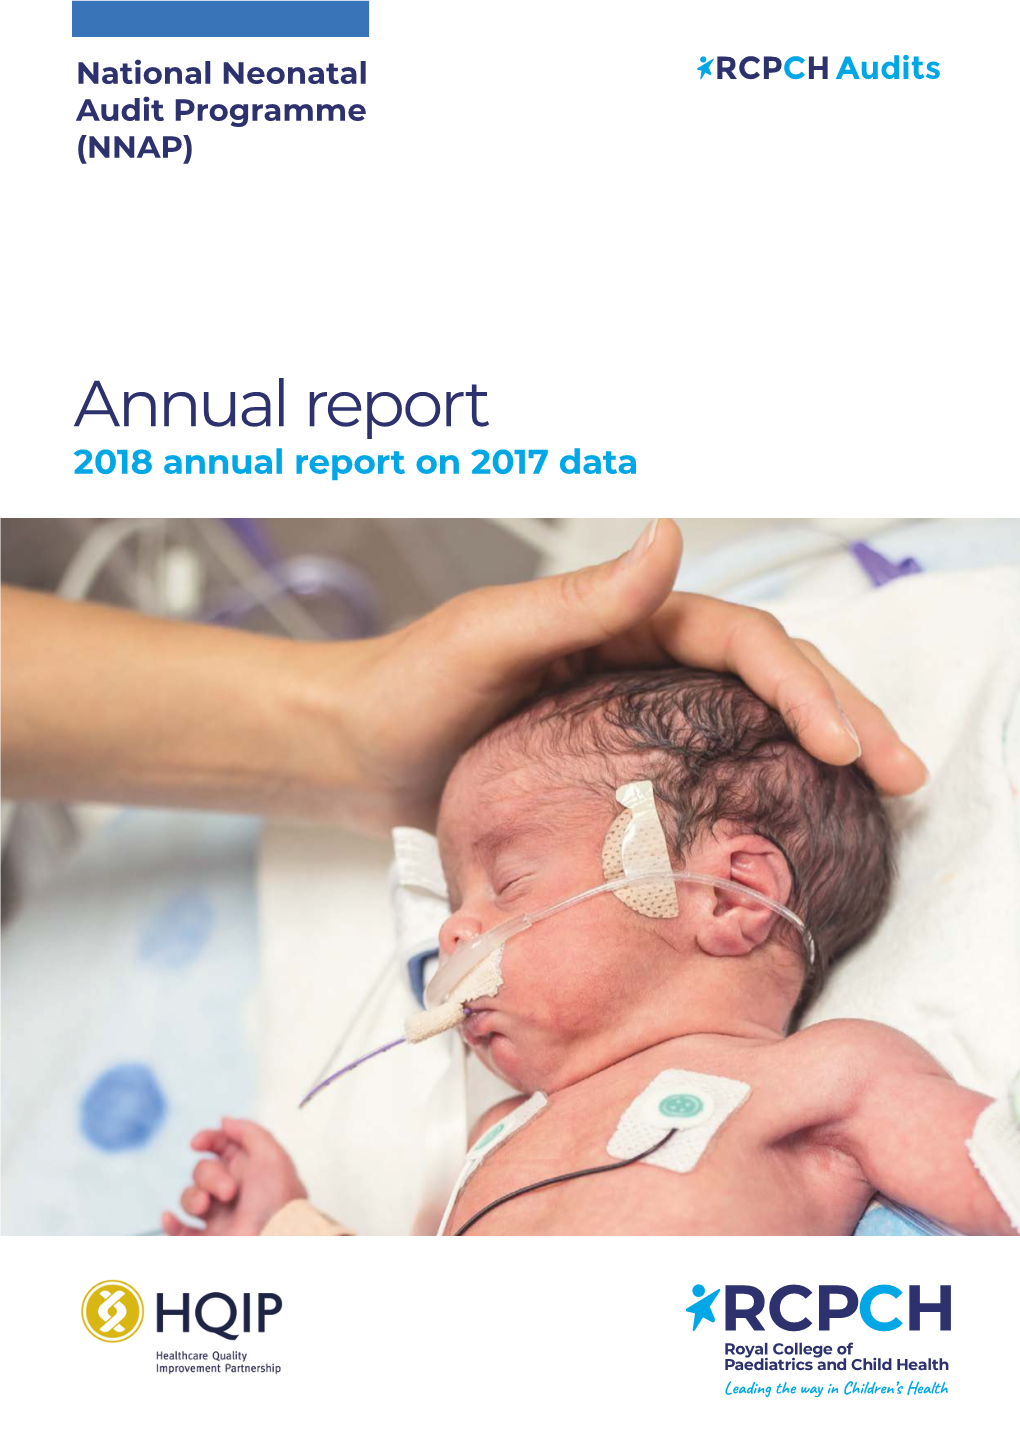 National Neonatal Audit Programme (NNAP) 2018 Annual Report on 2017 Data